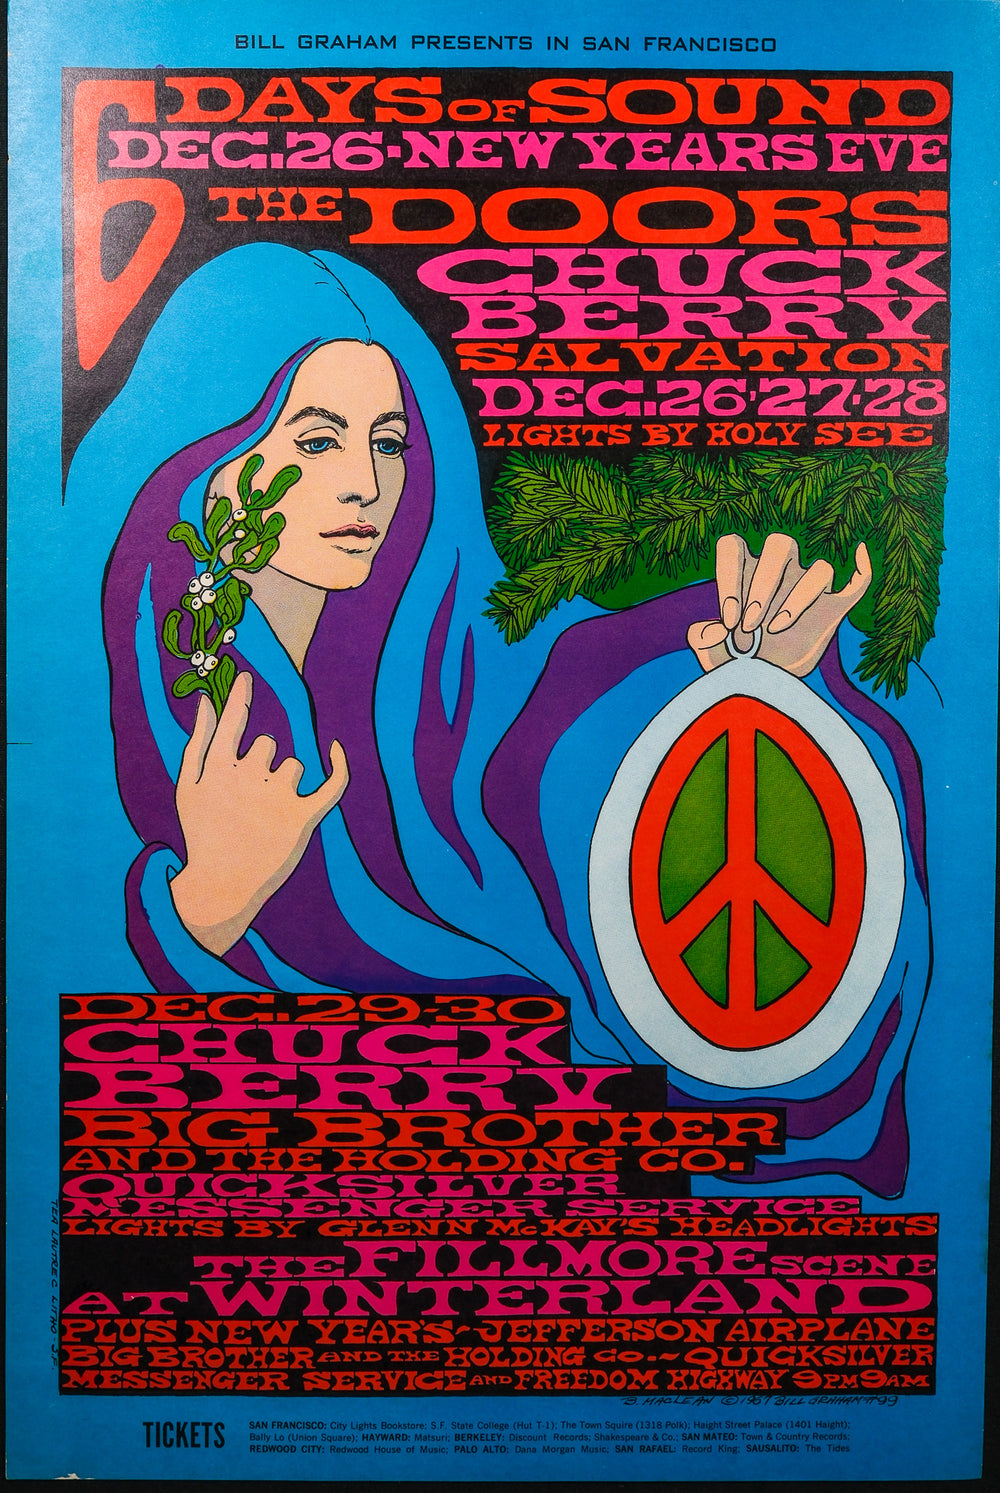 Concert Poster for 6 Days of sound in 1967 artwork with a woman holding a peace sign